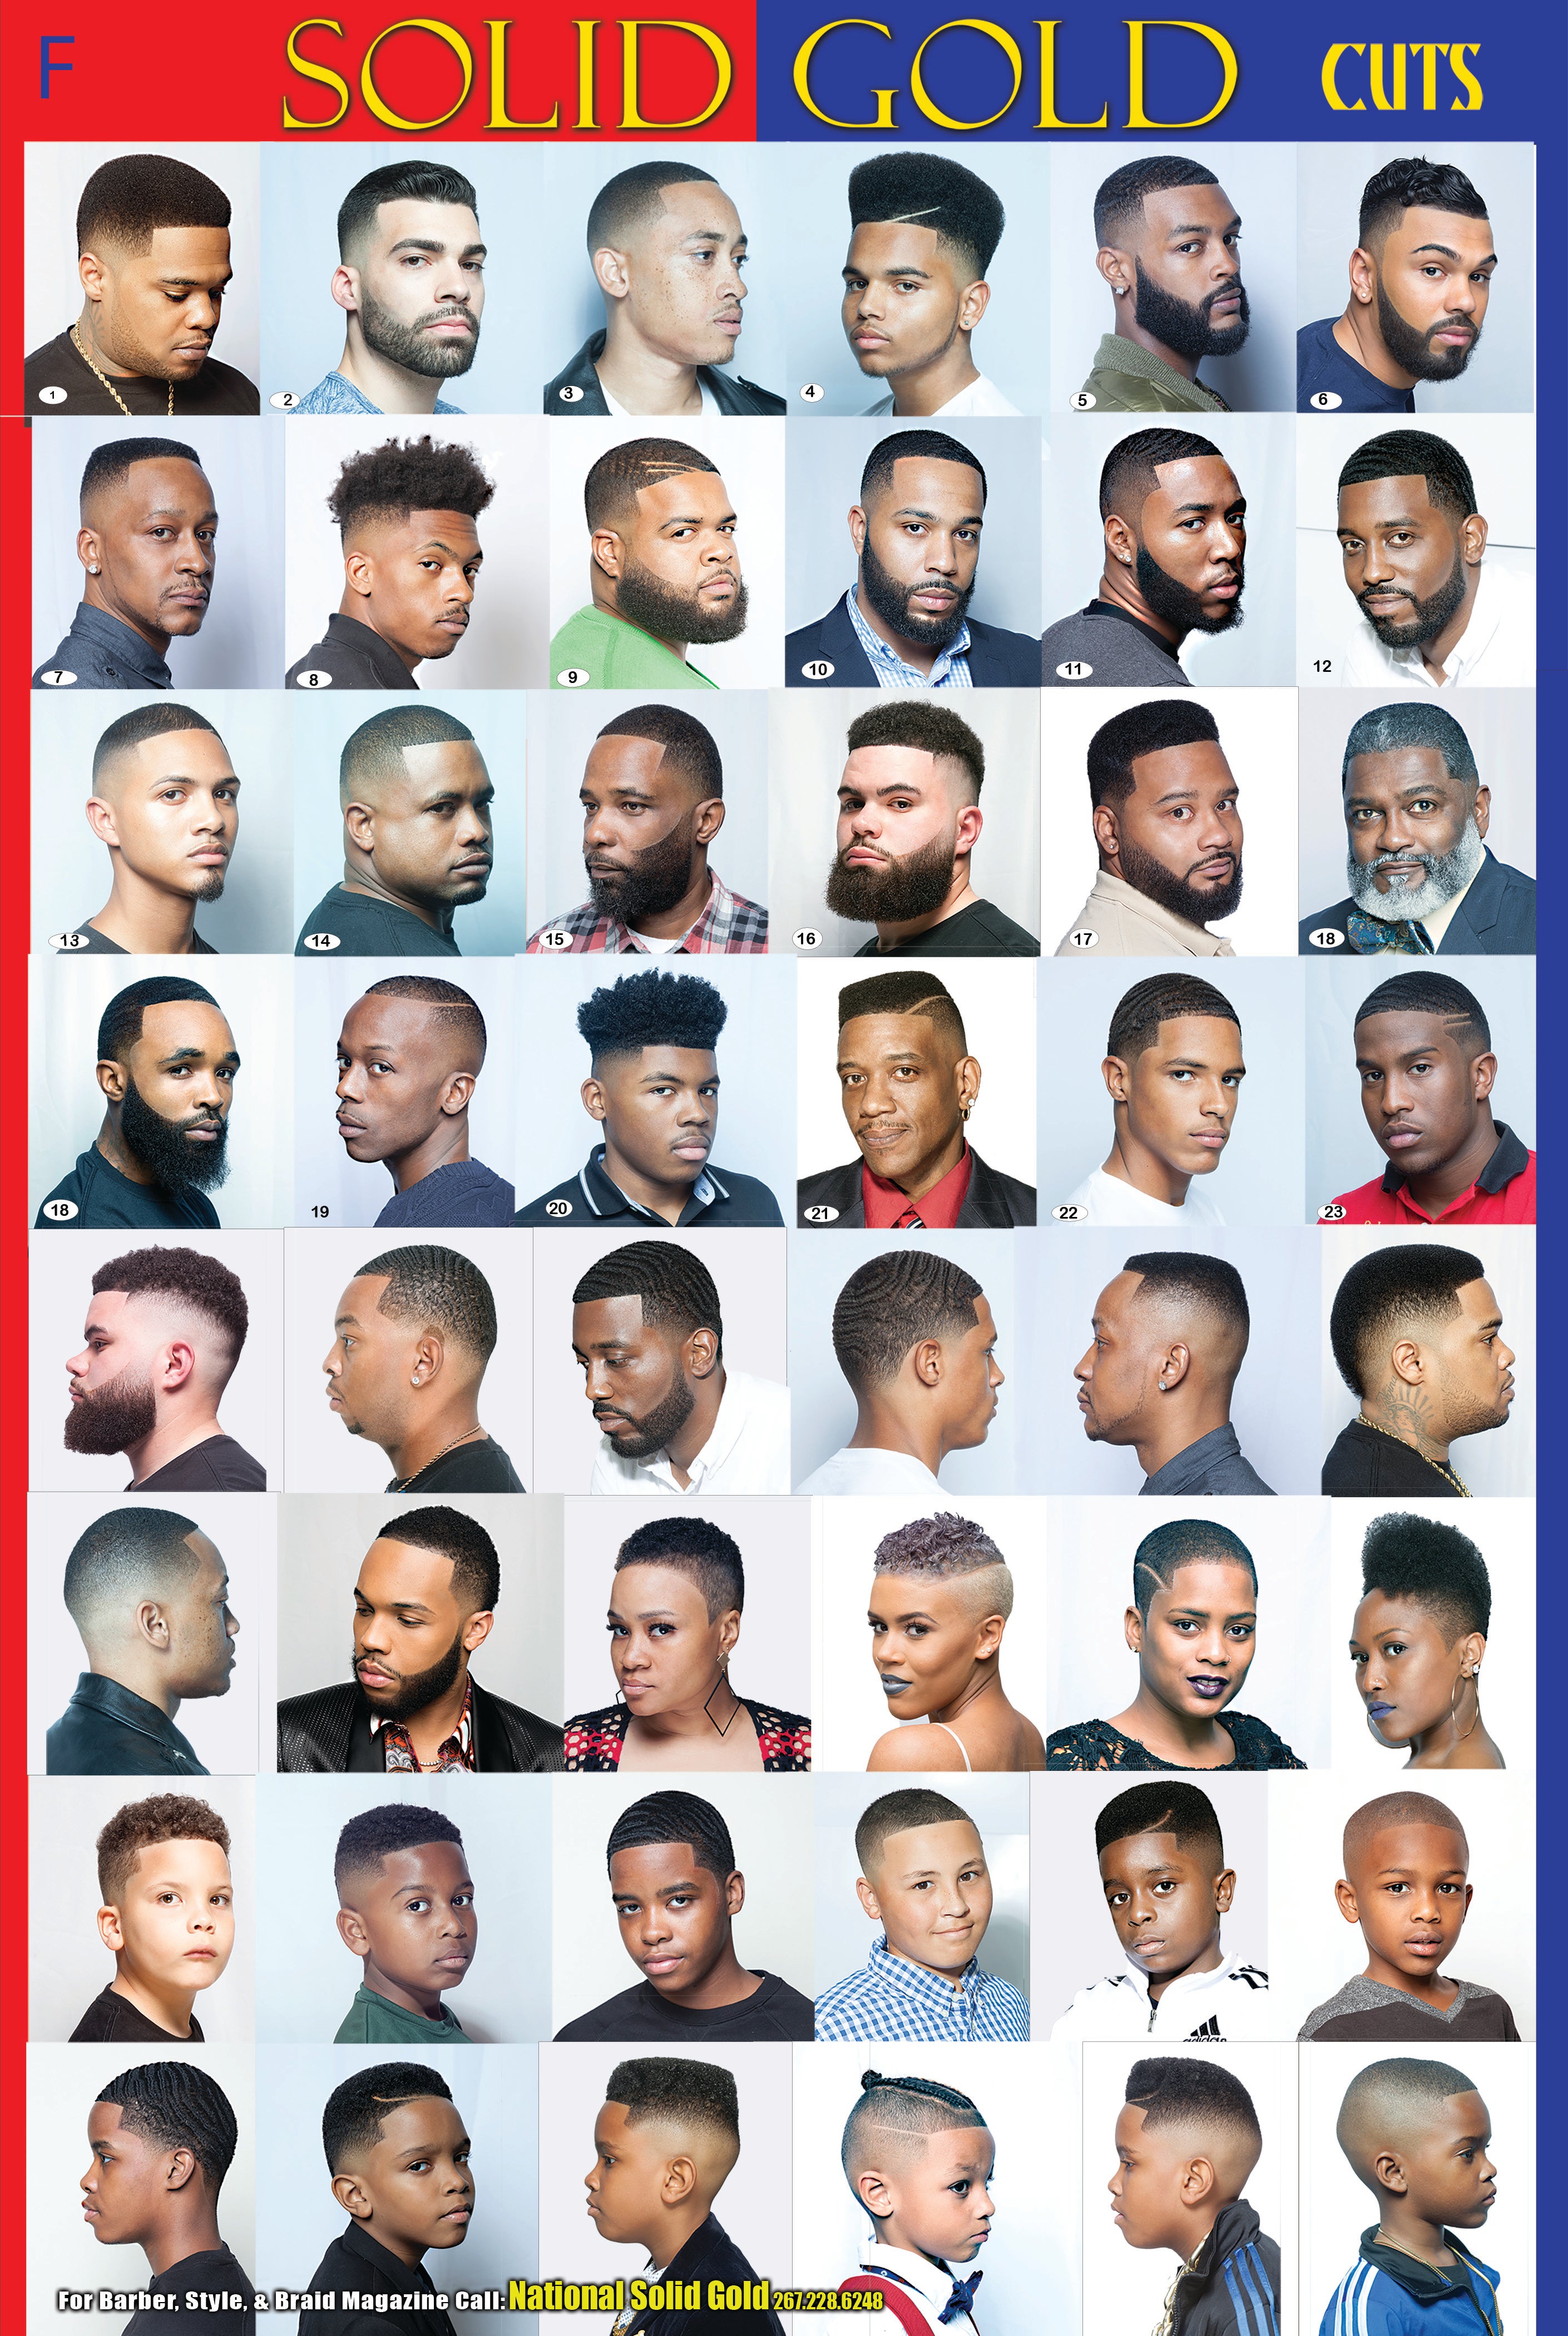 haircut styles for men chart